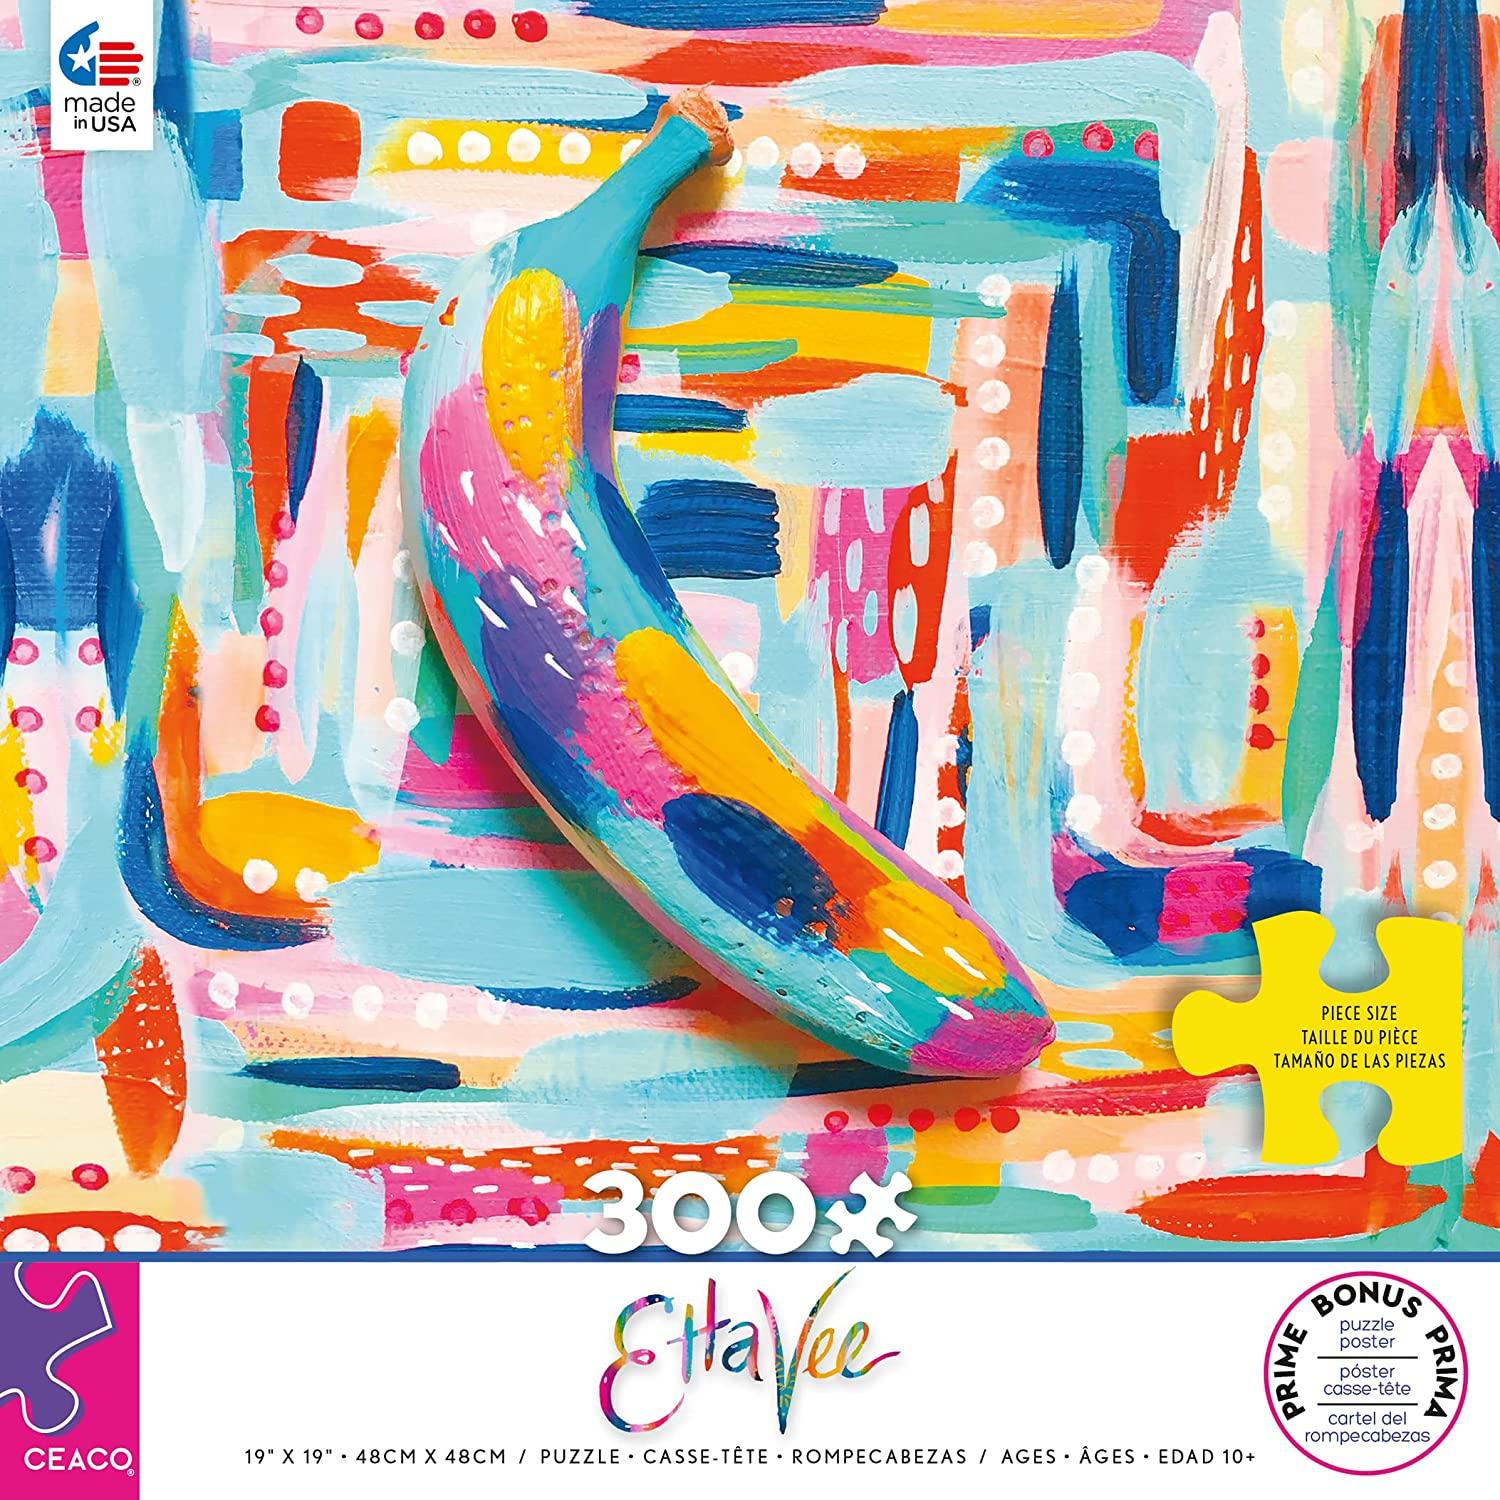 This 300 oversized piece Etta Vee puzzle features a bold and vibrantly colorful abstract pattern with a banana in the center. Artist, designer, social media influencer, Jessi Raulet, has become well known for her hand-painted designs. Etta Vee is her lifestyle brand that expresses optimism and joy through color.